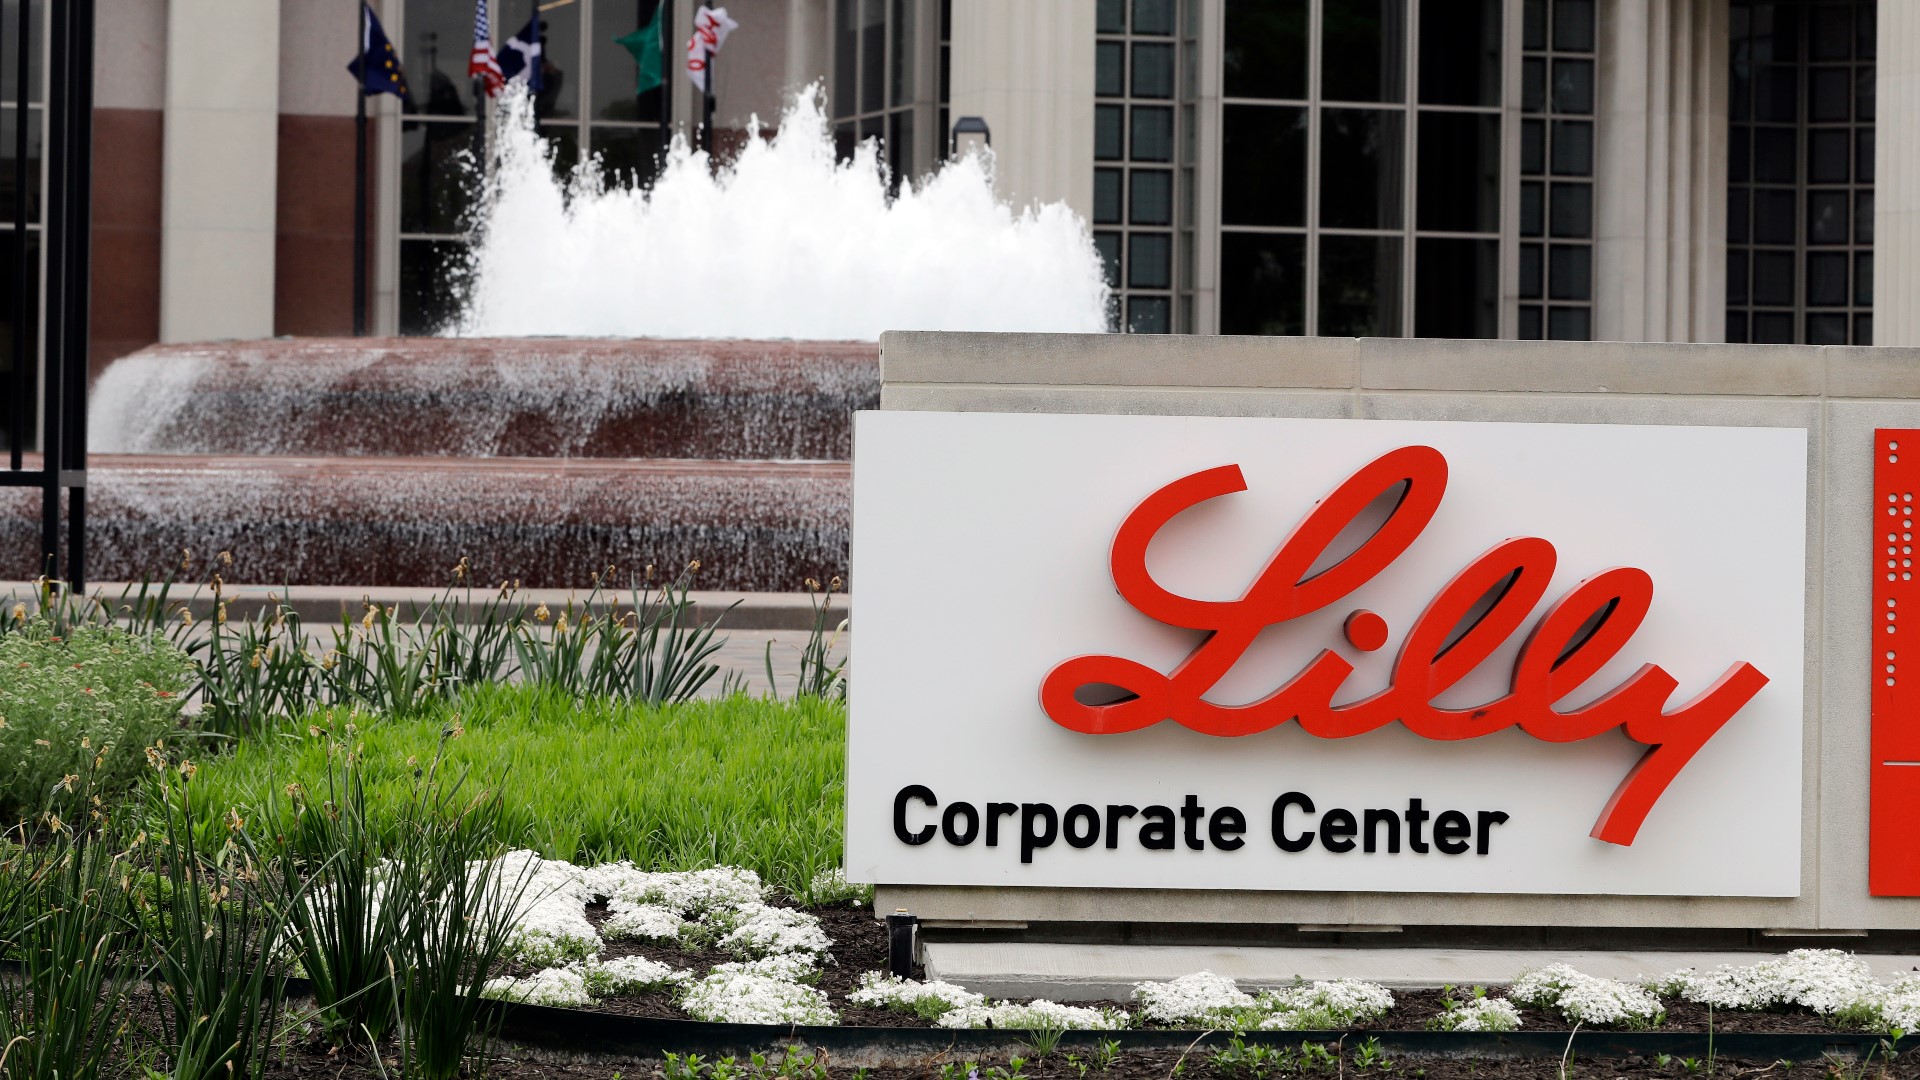 Eli Lilly and Company announced its plans to bring employees back to the office.